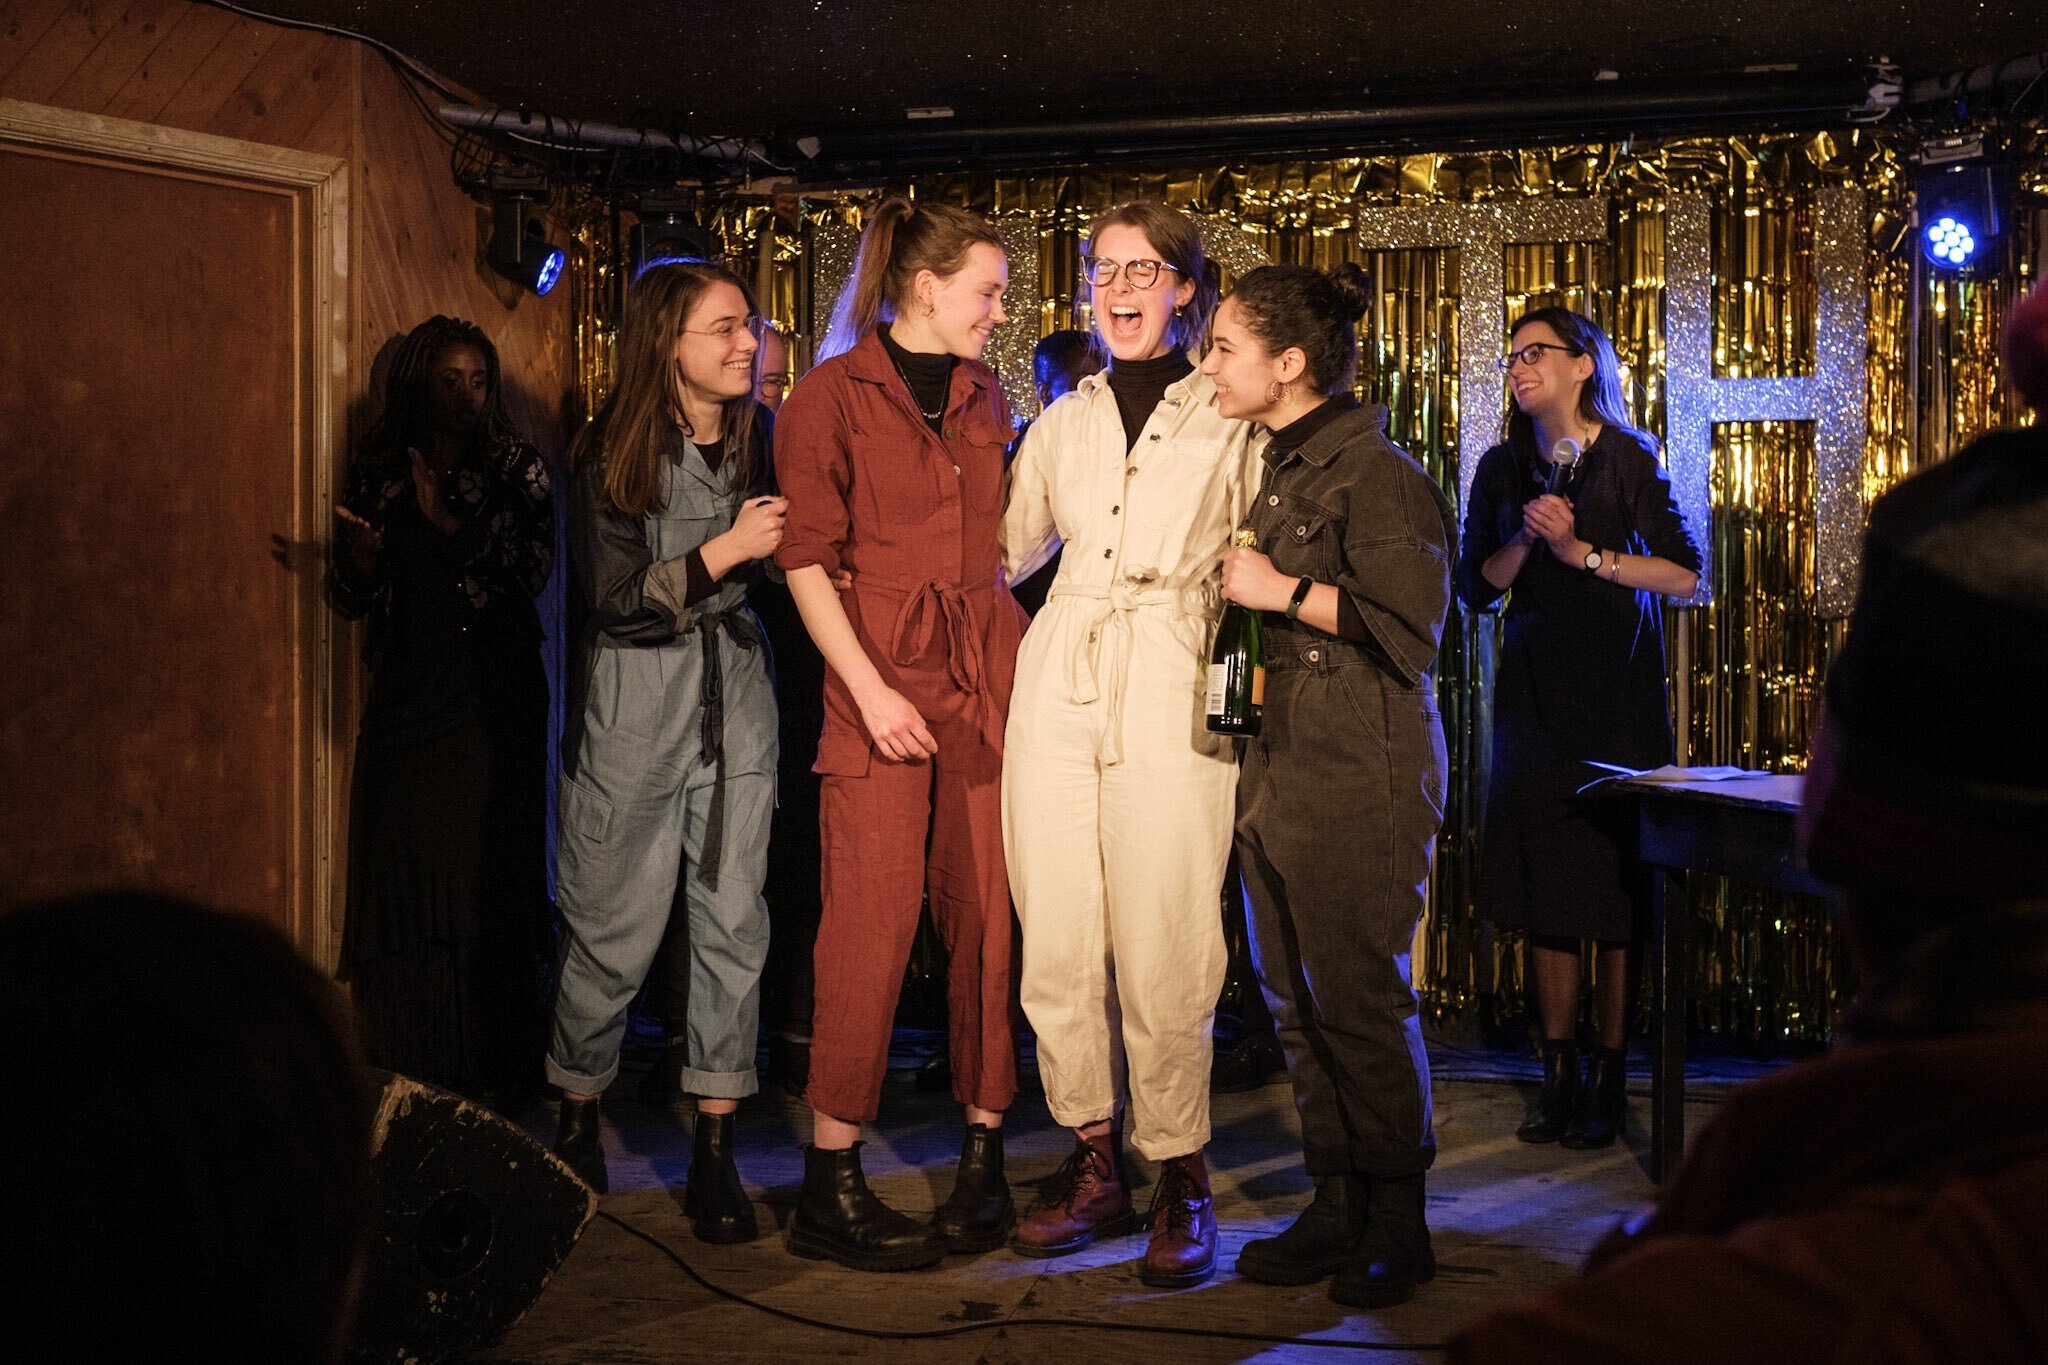 Four smiling women stand on stage at a live music venue in jumpsuits.